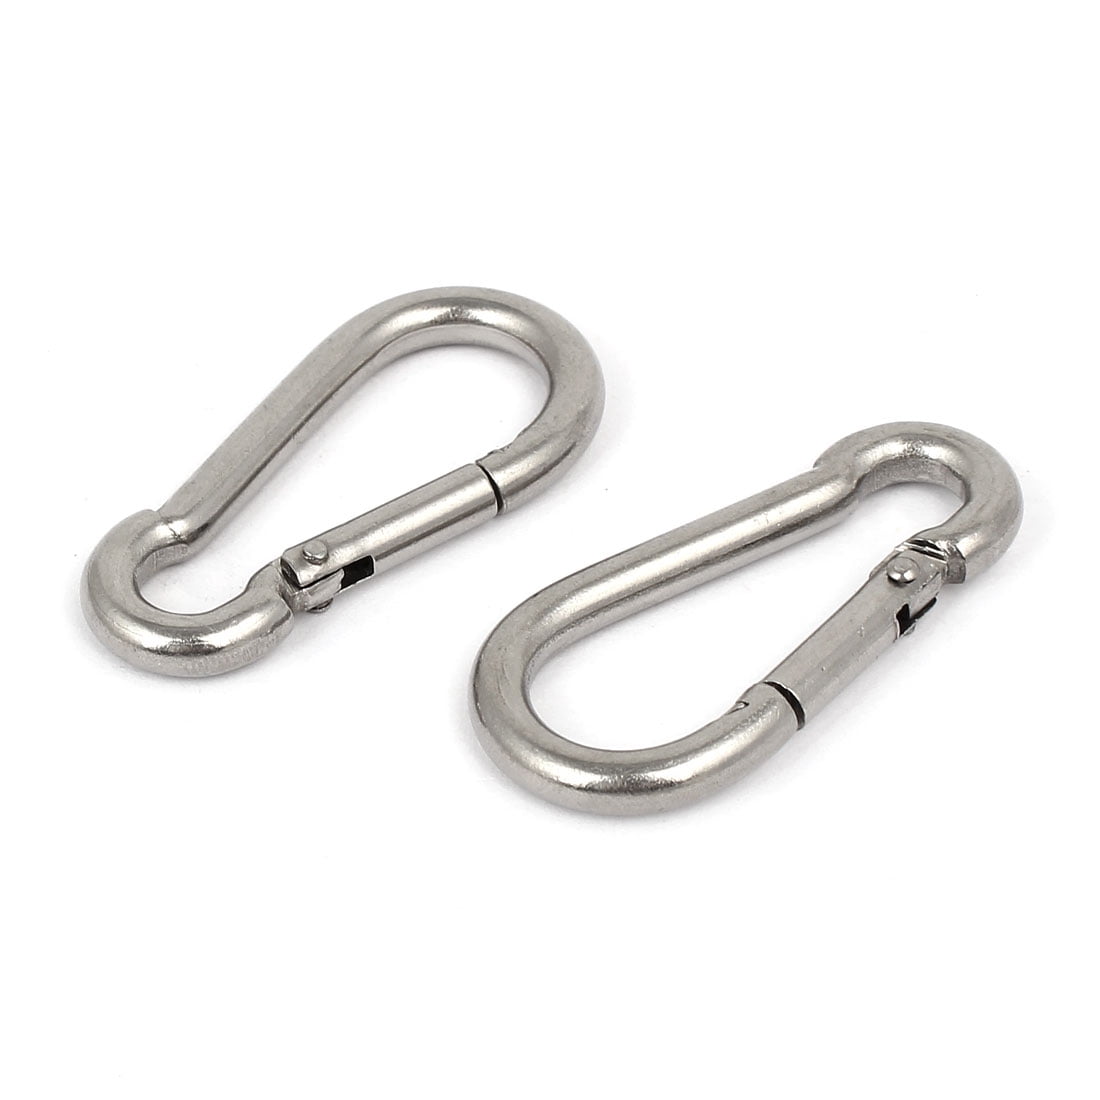 Details about   5 PC 3/16'' x 50mm Carabiner Spring Snap Hook  Marine Stainless Steel 80 Lbs 